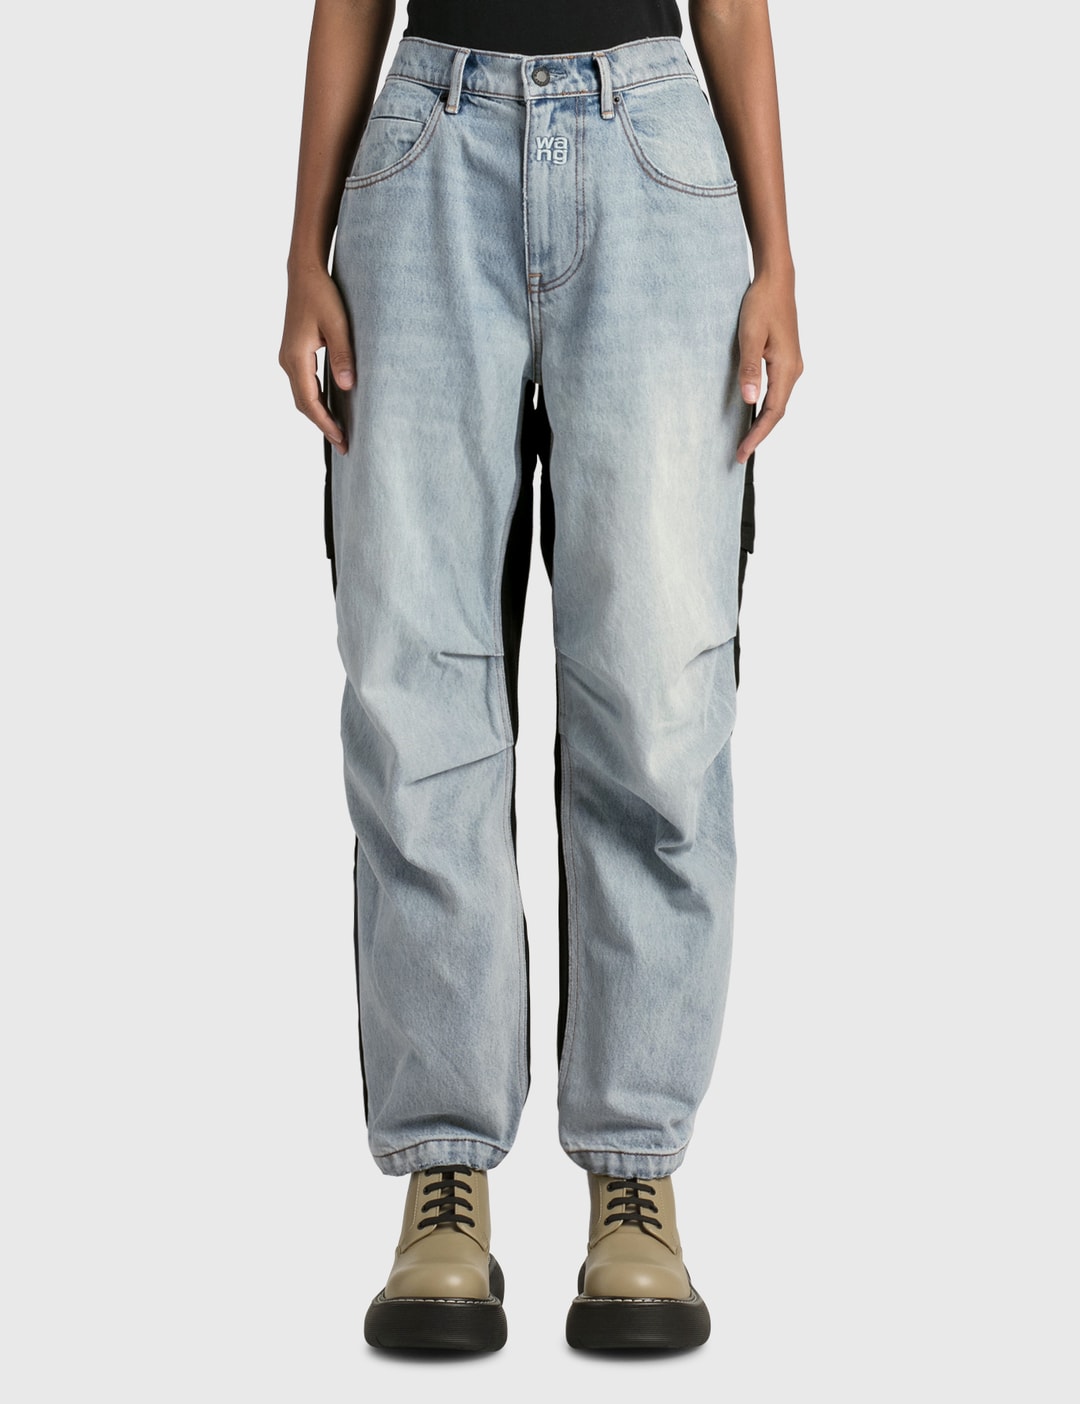 T By Alexander Wang - Hybrid Cargo Jeans | - Globally Curated Fashion and Lifestyle by Hypebeast